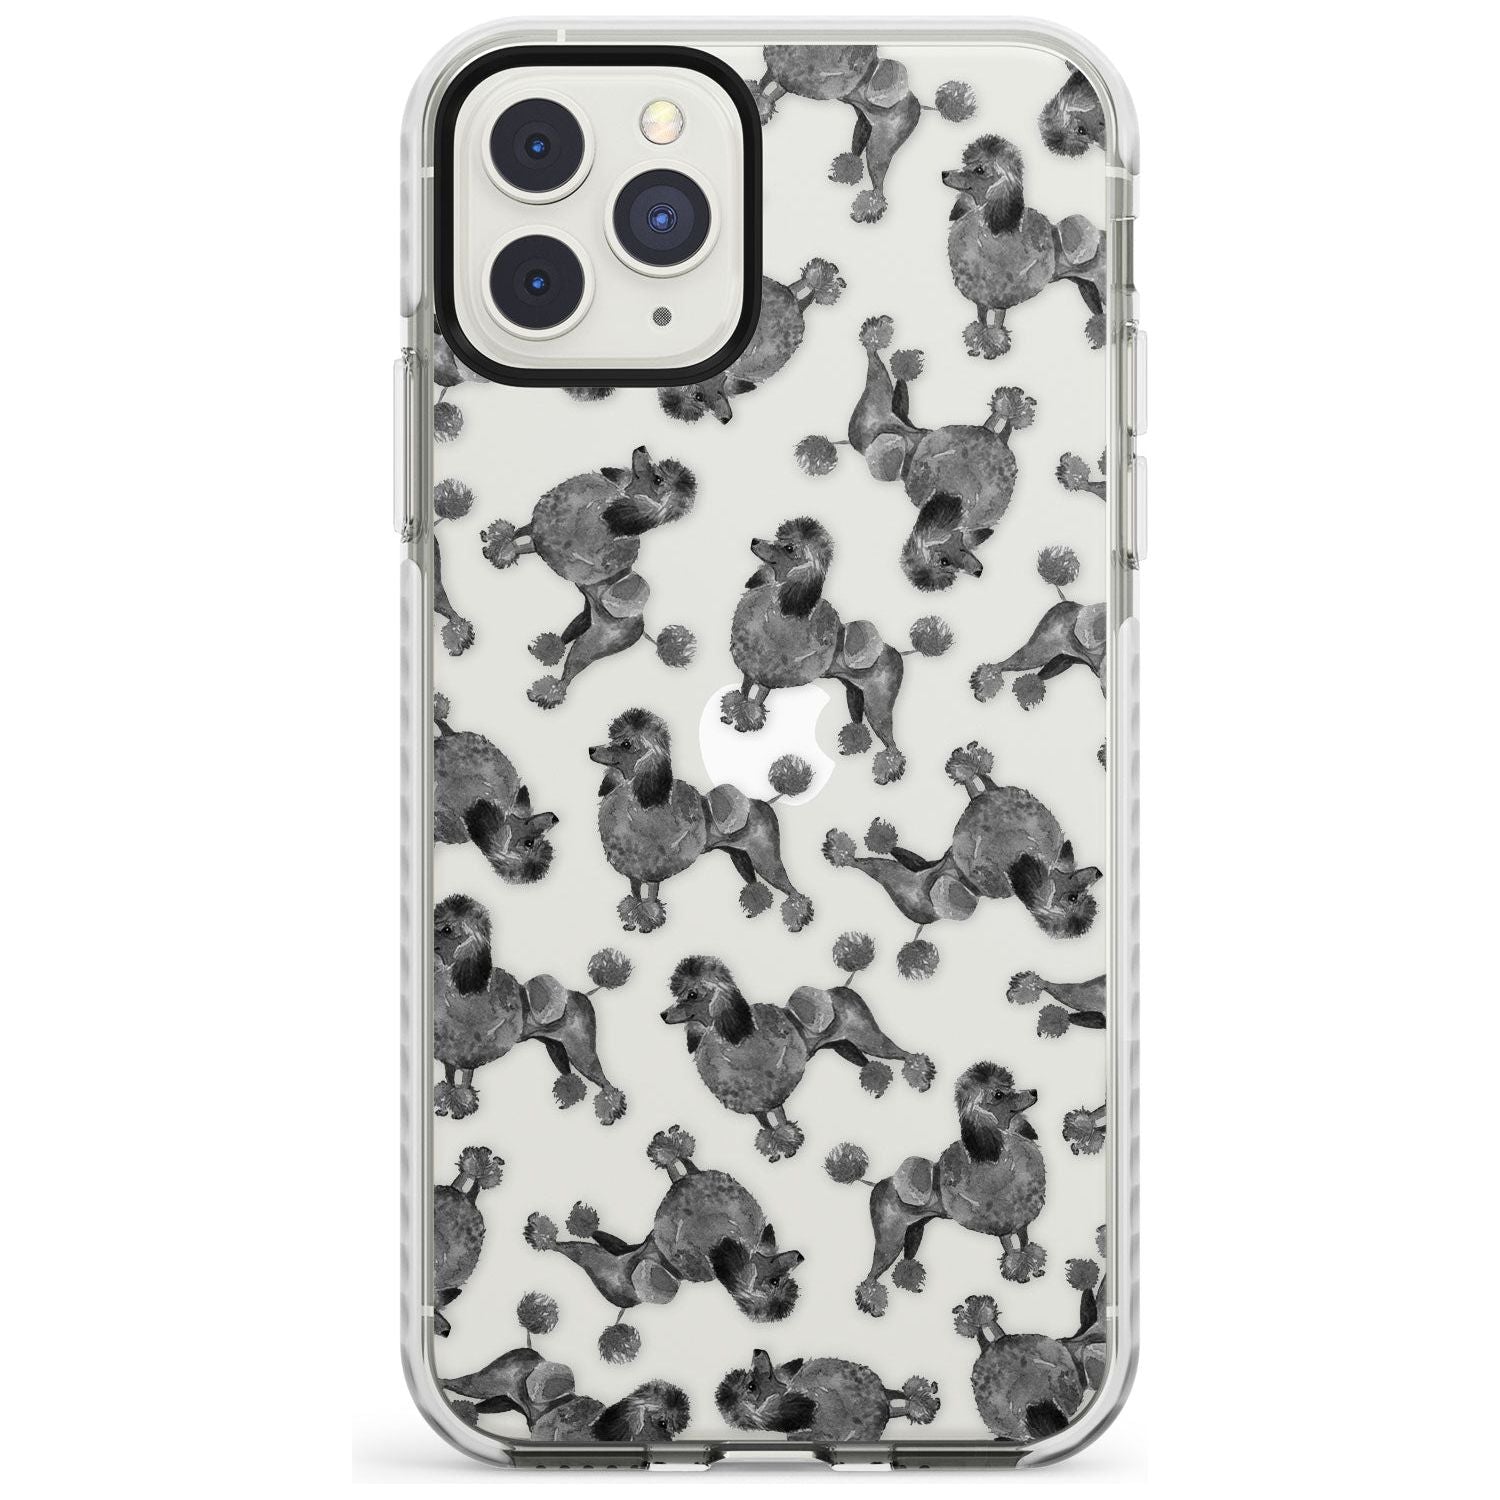 Poodle (Black) Watercolour Dog Pattern Impact Phone Case for iPhone 11 Pro Max